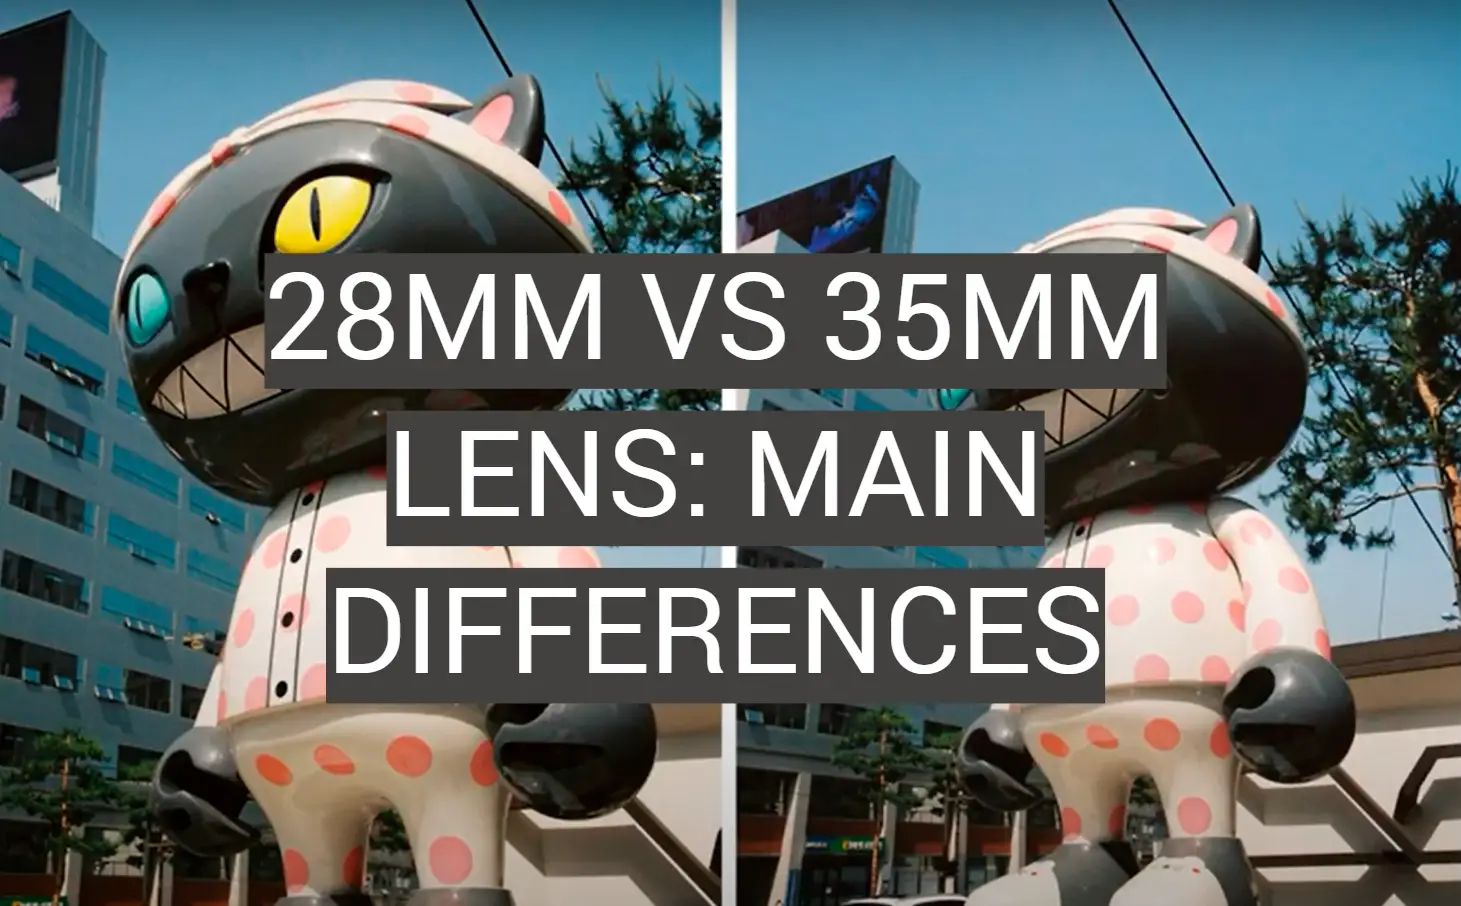 28mm vs 35mm Lens: Main Differences